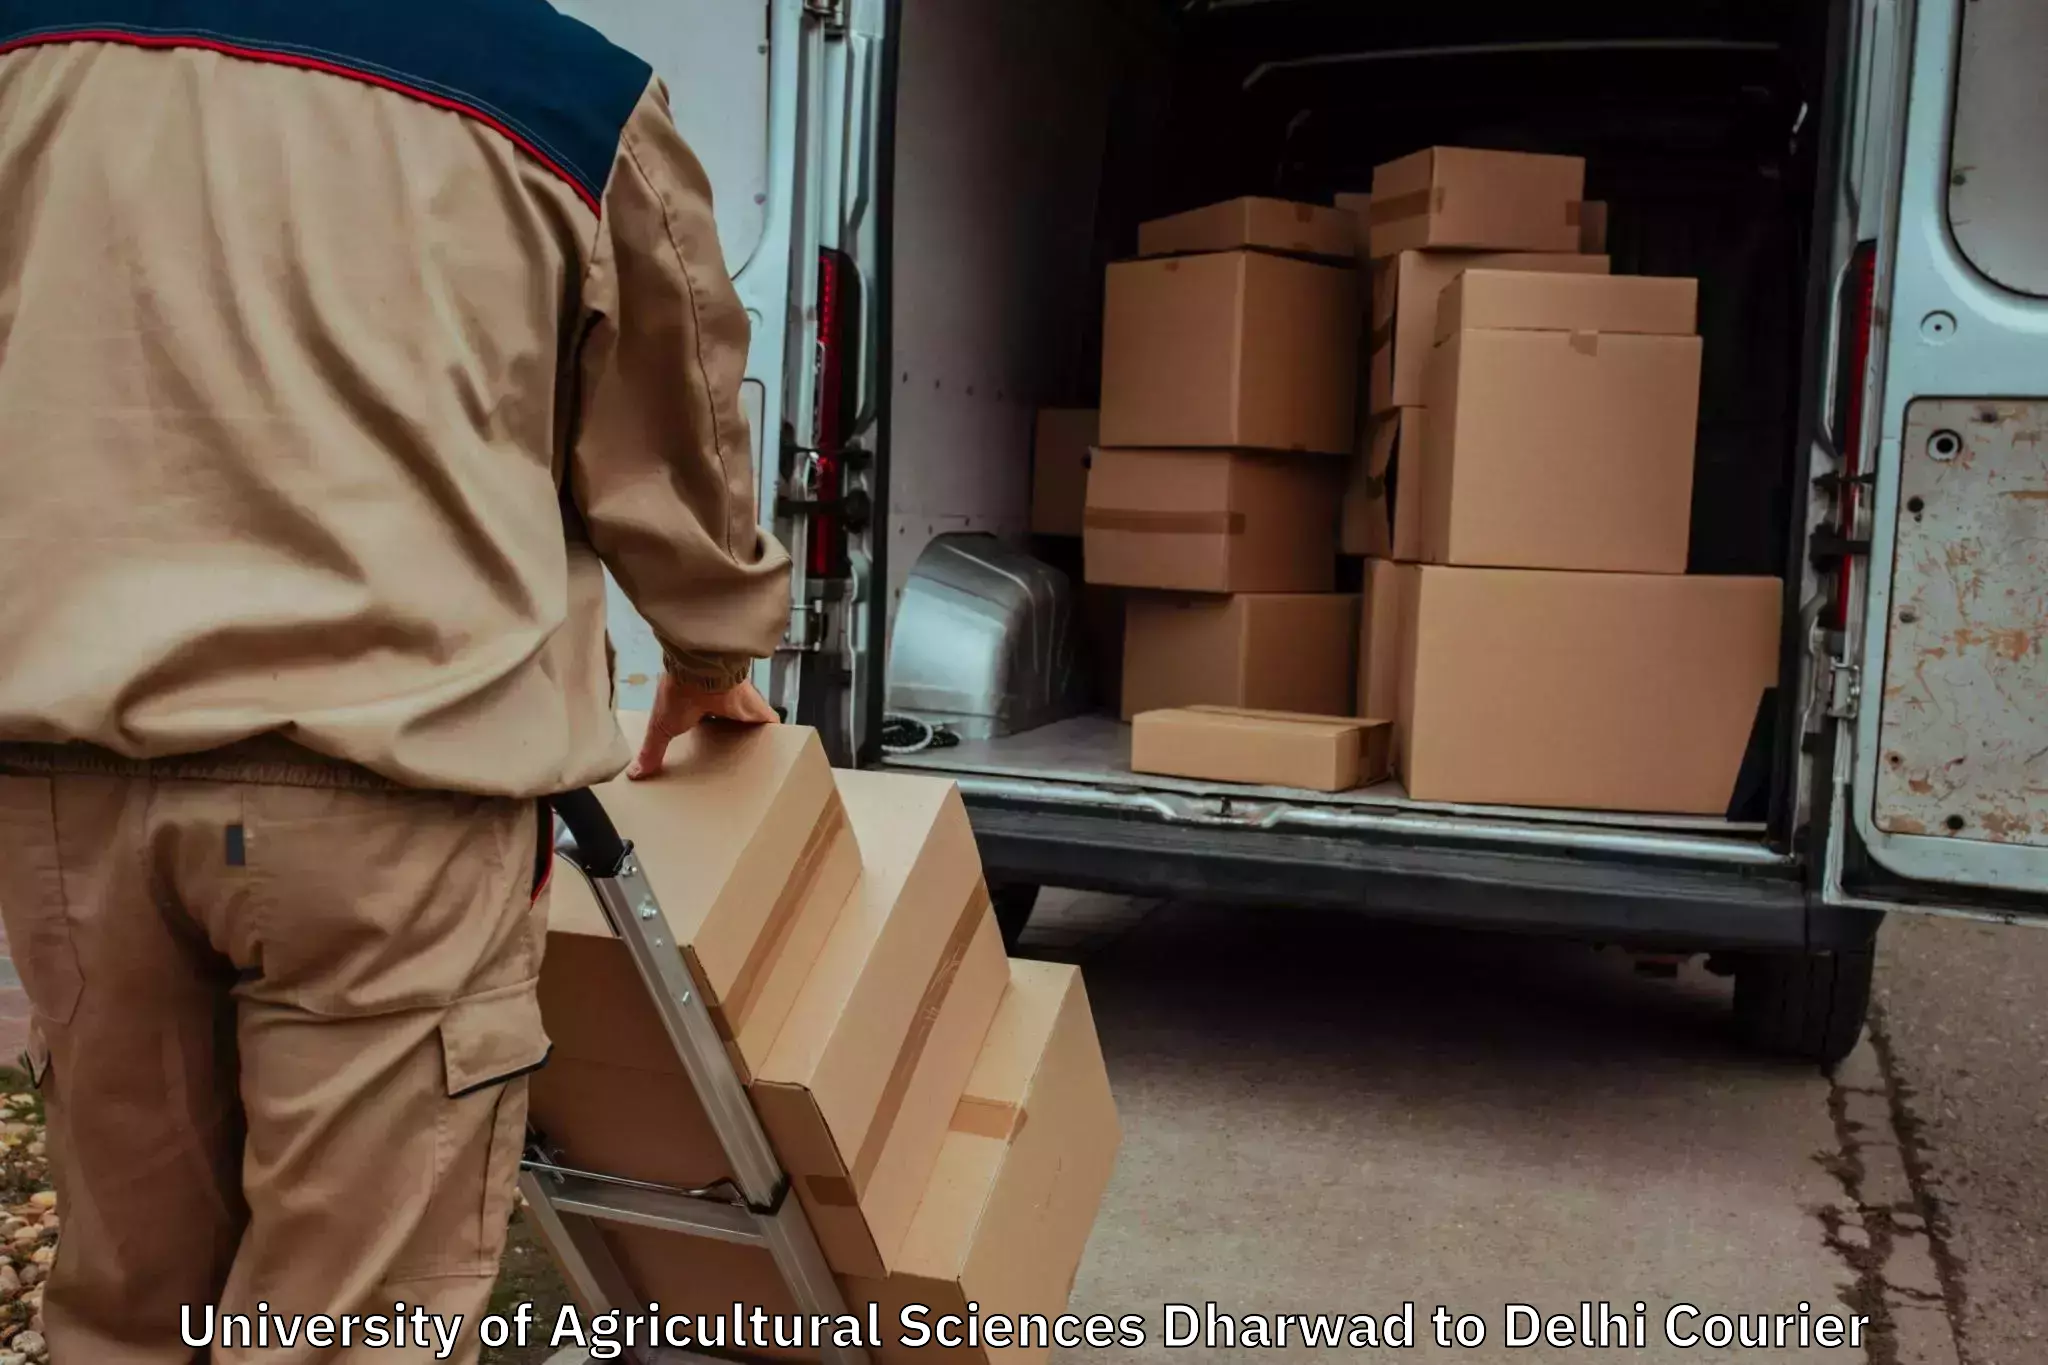 Trusted moving company University of Agricultural Sciences Dharwad to Delhi